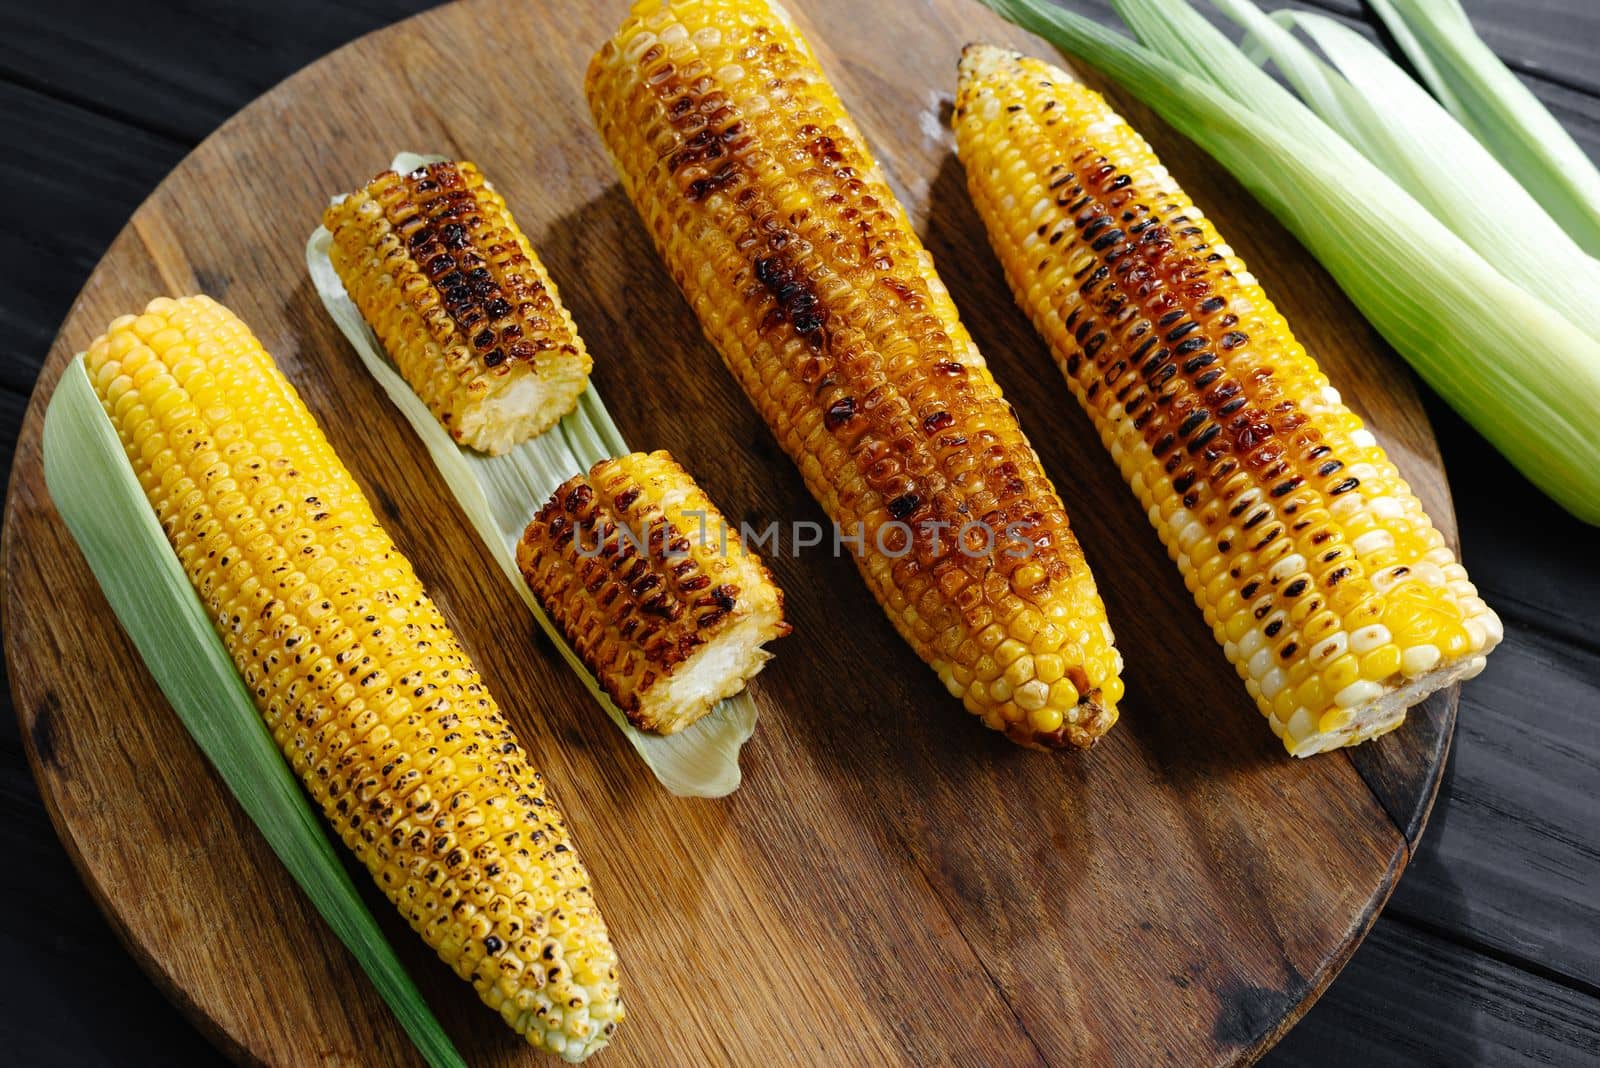 Roasted barbecue corn. Grilled corn on a dark wooden background. Slices of sliced corn grilled on charcoal. Top view.